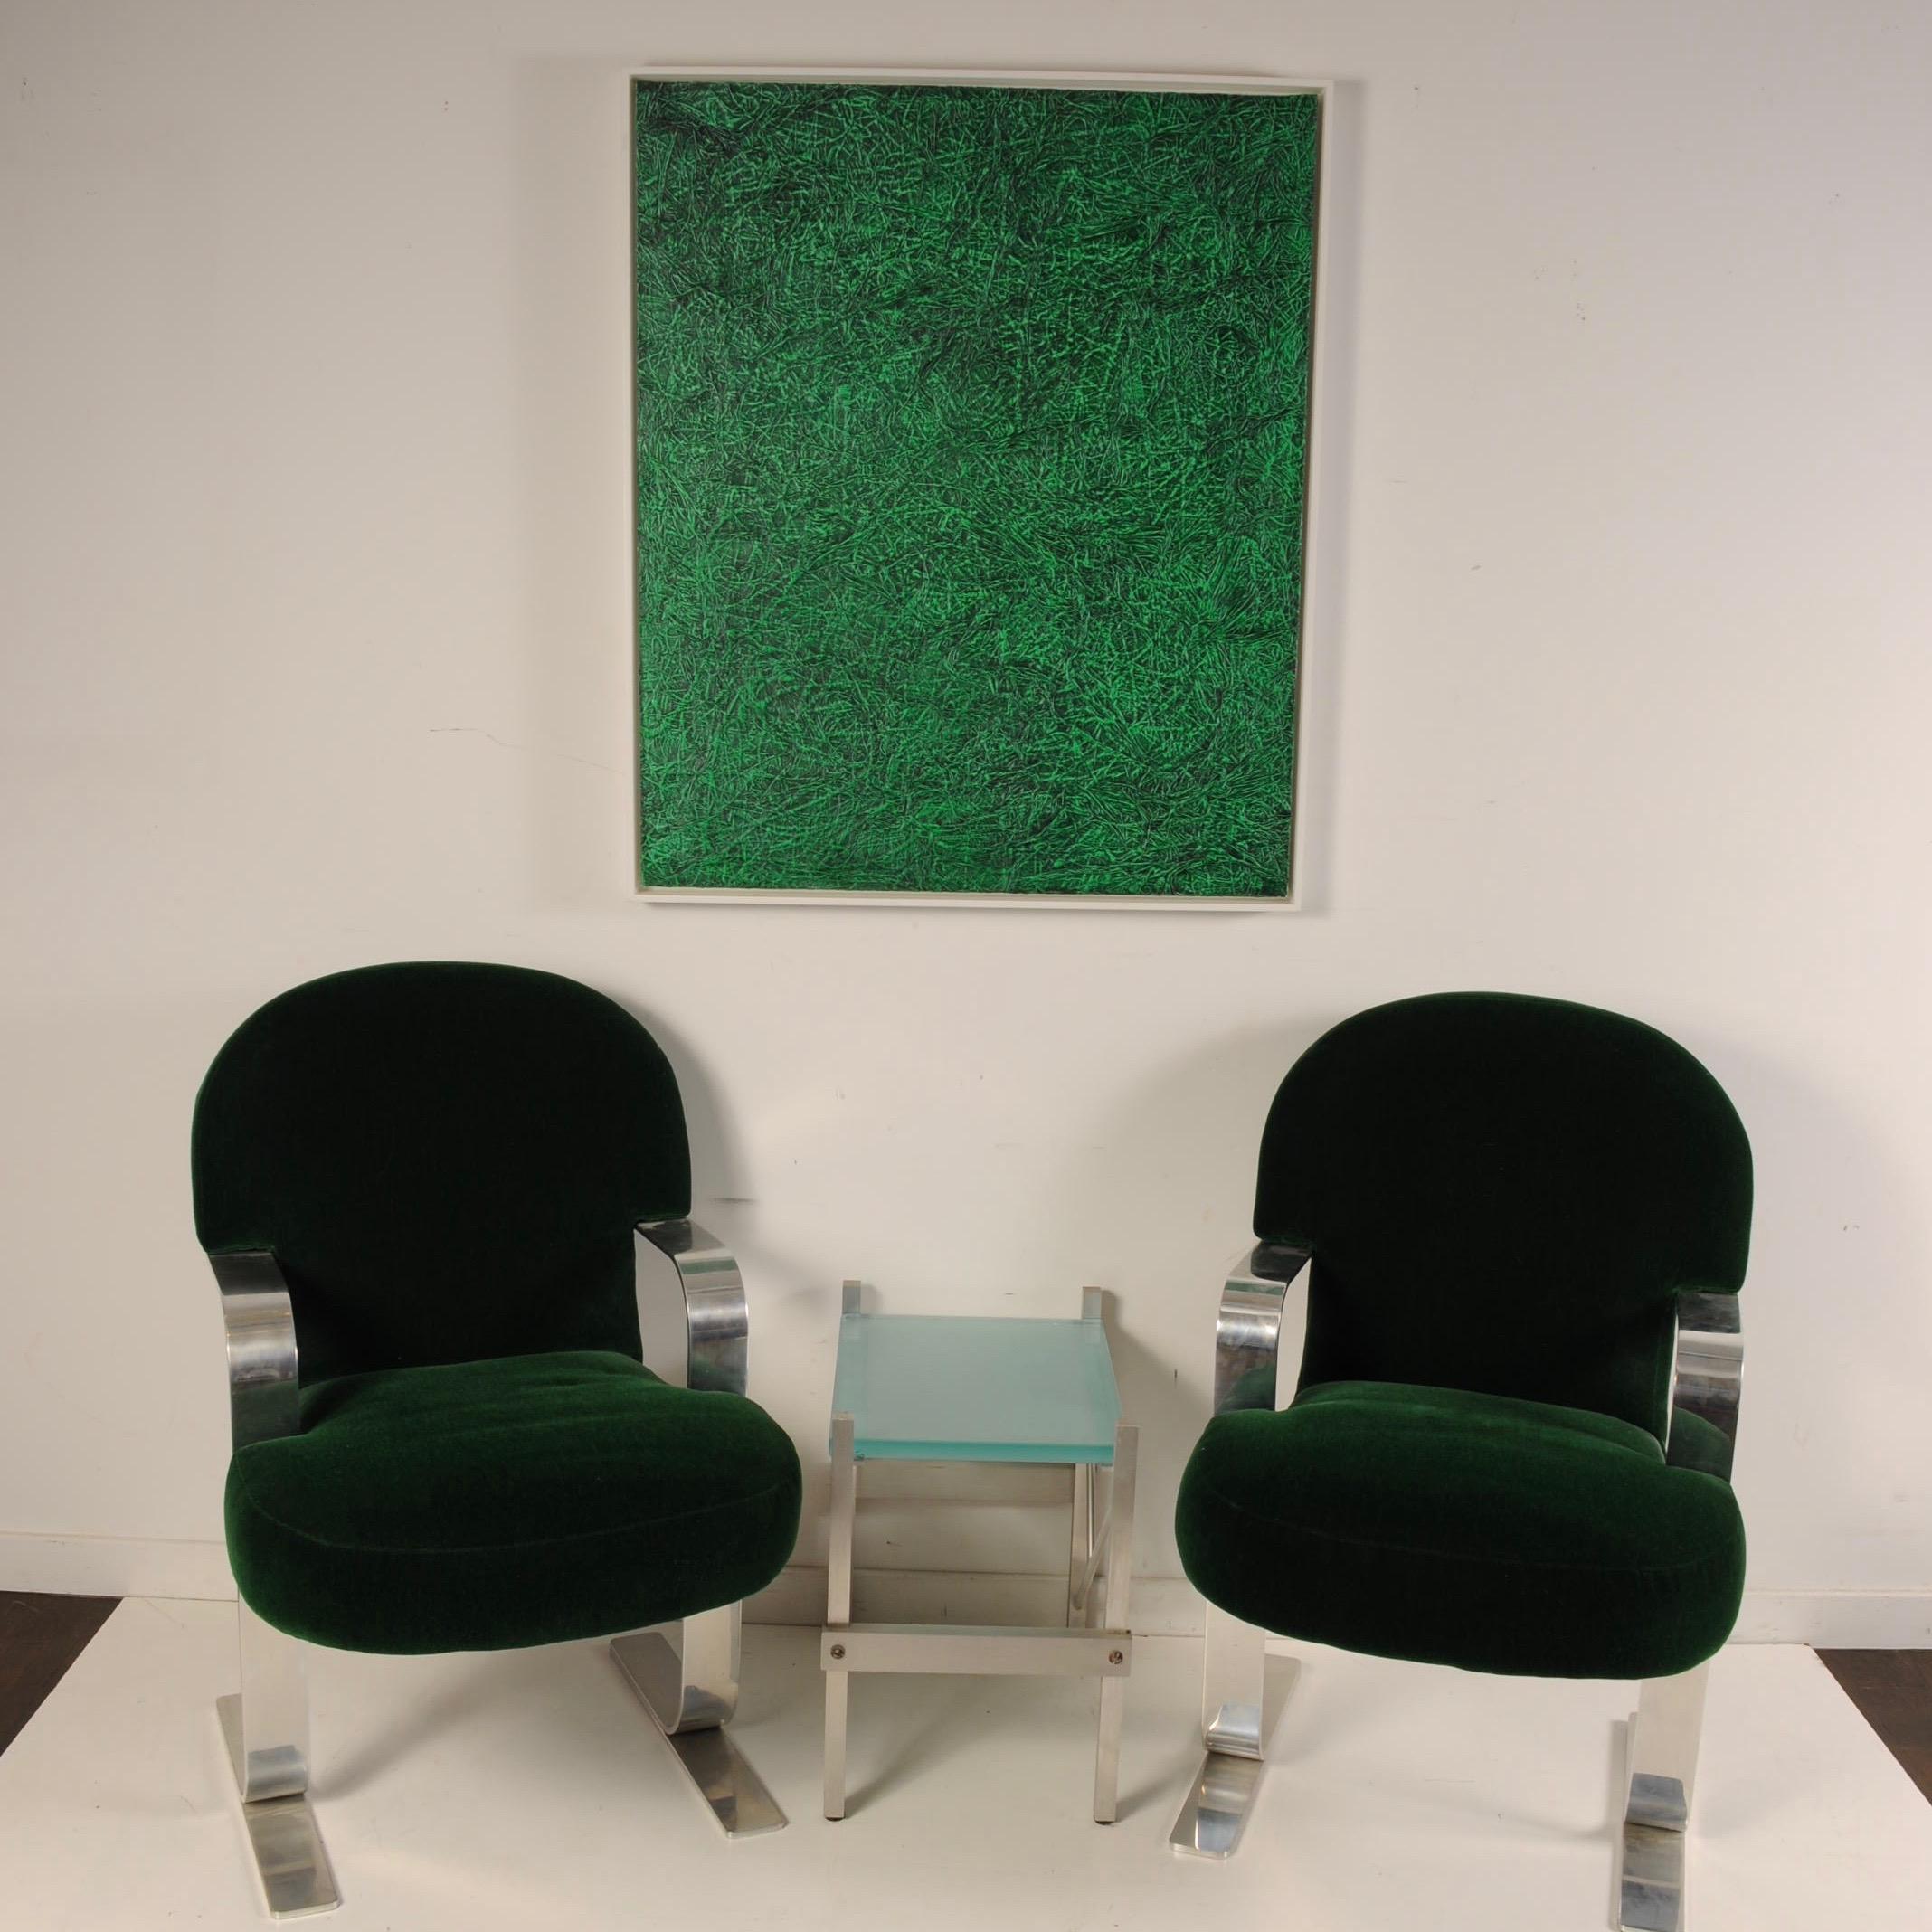 Clean pair of cantilevered armchairs in hunter green mohair with heavy, polished steel arms and legs. A nice blend of Art Deco with a modern Brueton-like polished frame. The design of the legs is rather unique to this chair. Haven't seen this design